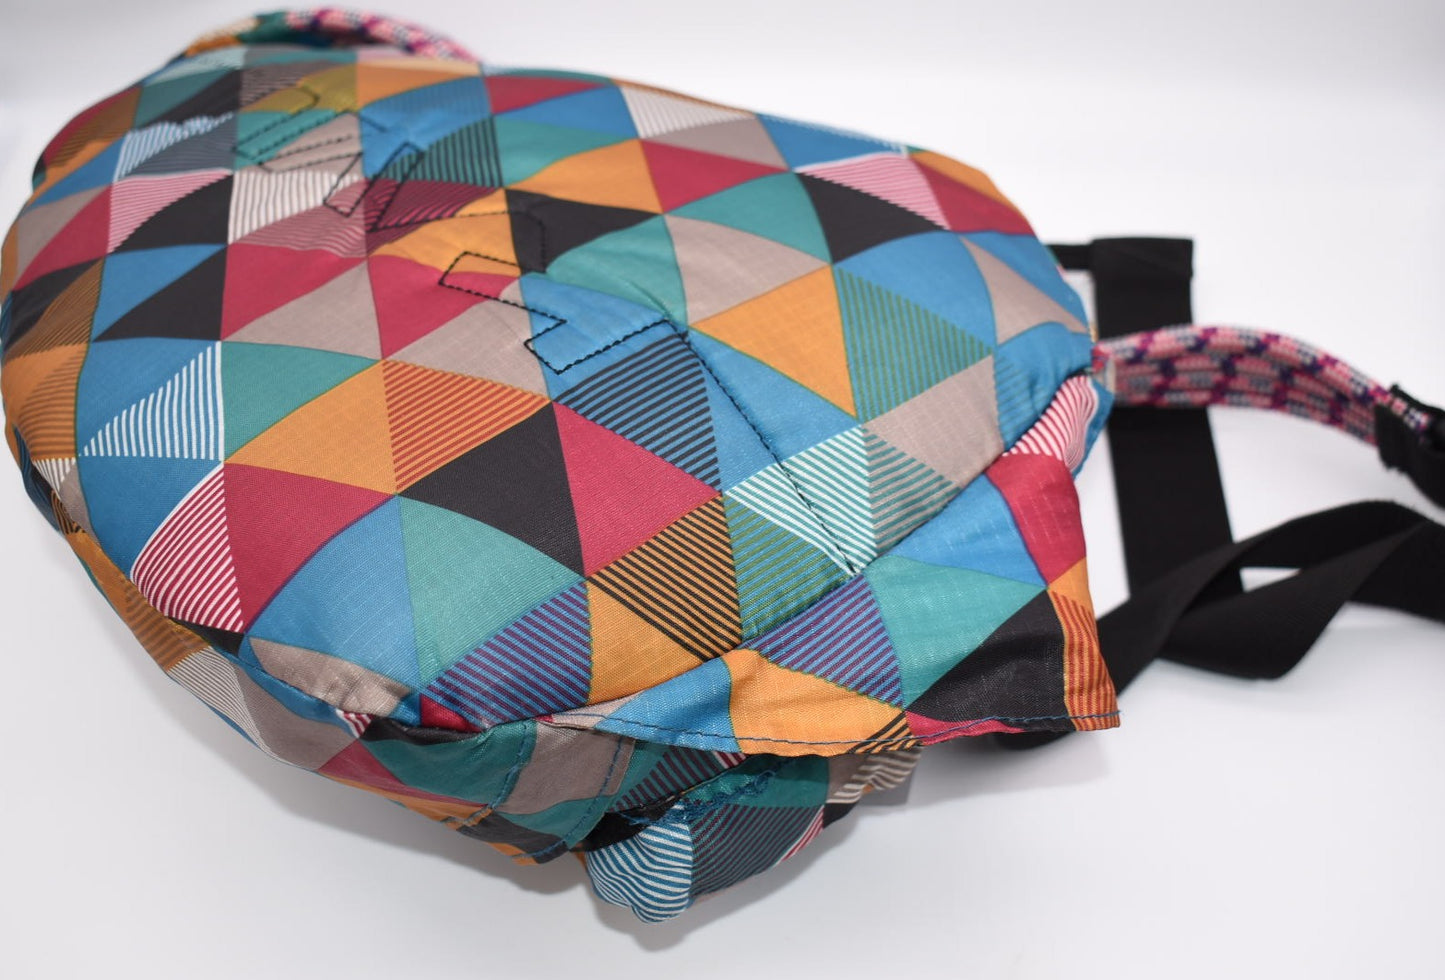 Kavu Nylon Rope Sack in Stained Glass